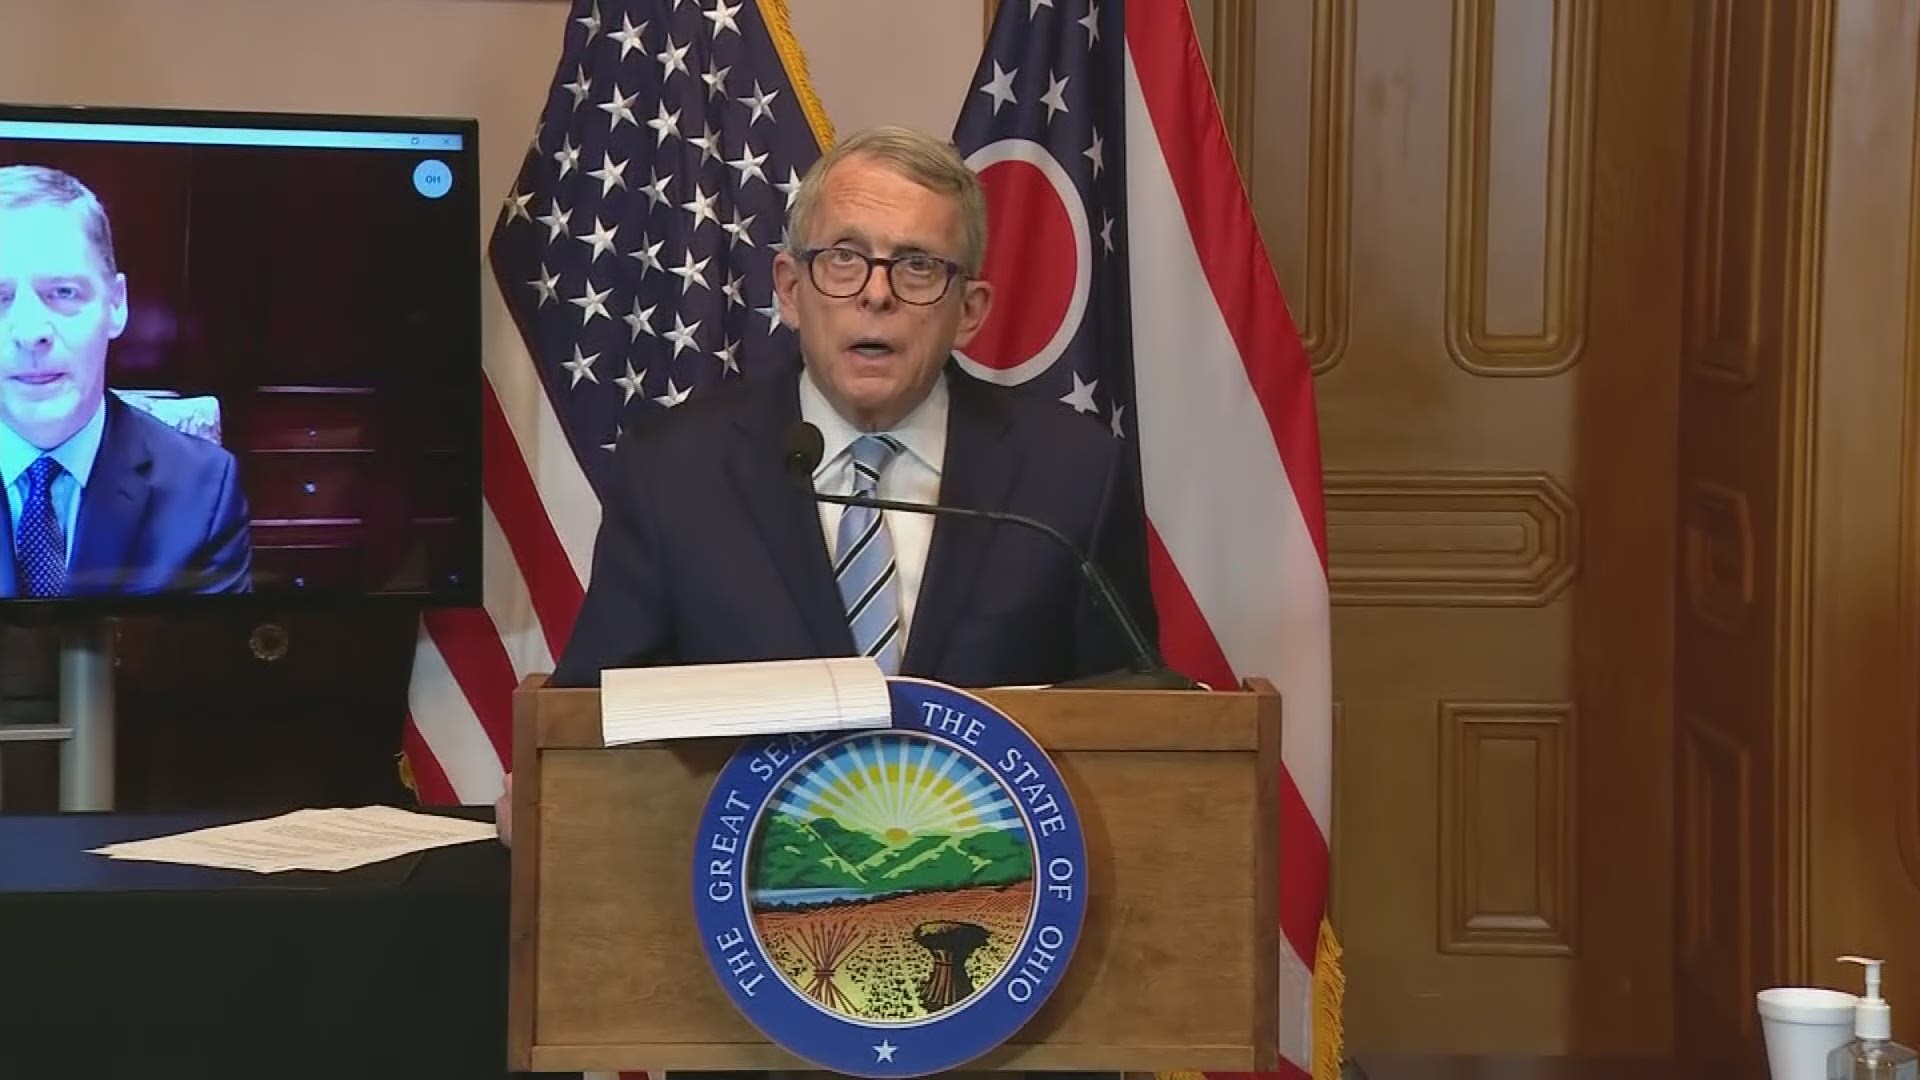 "The President understands the importance of protecting our first reponders."  Governor DeWine says the President will get this done.